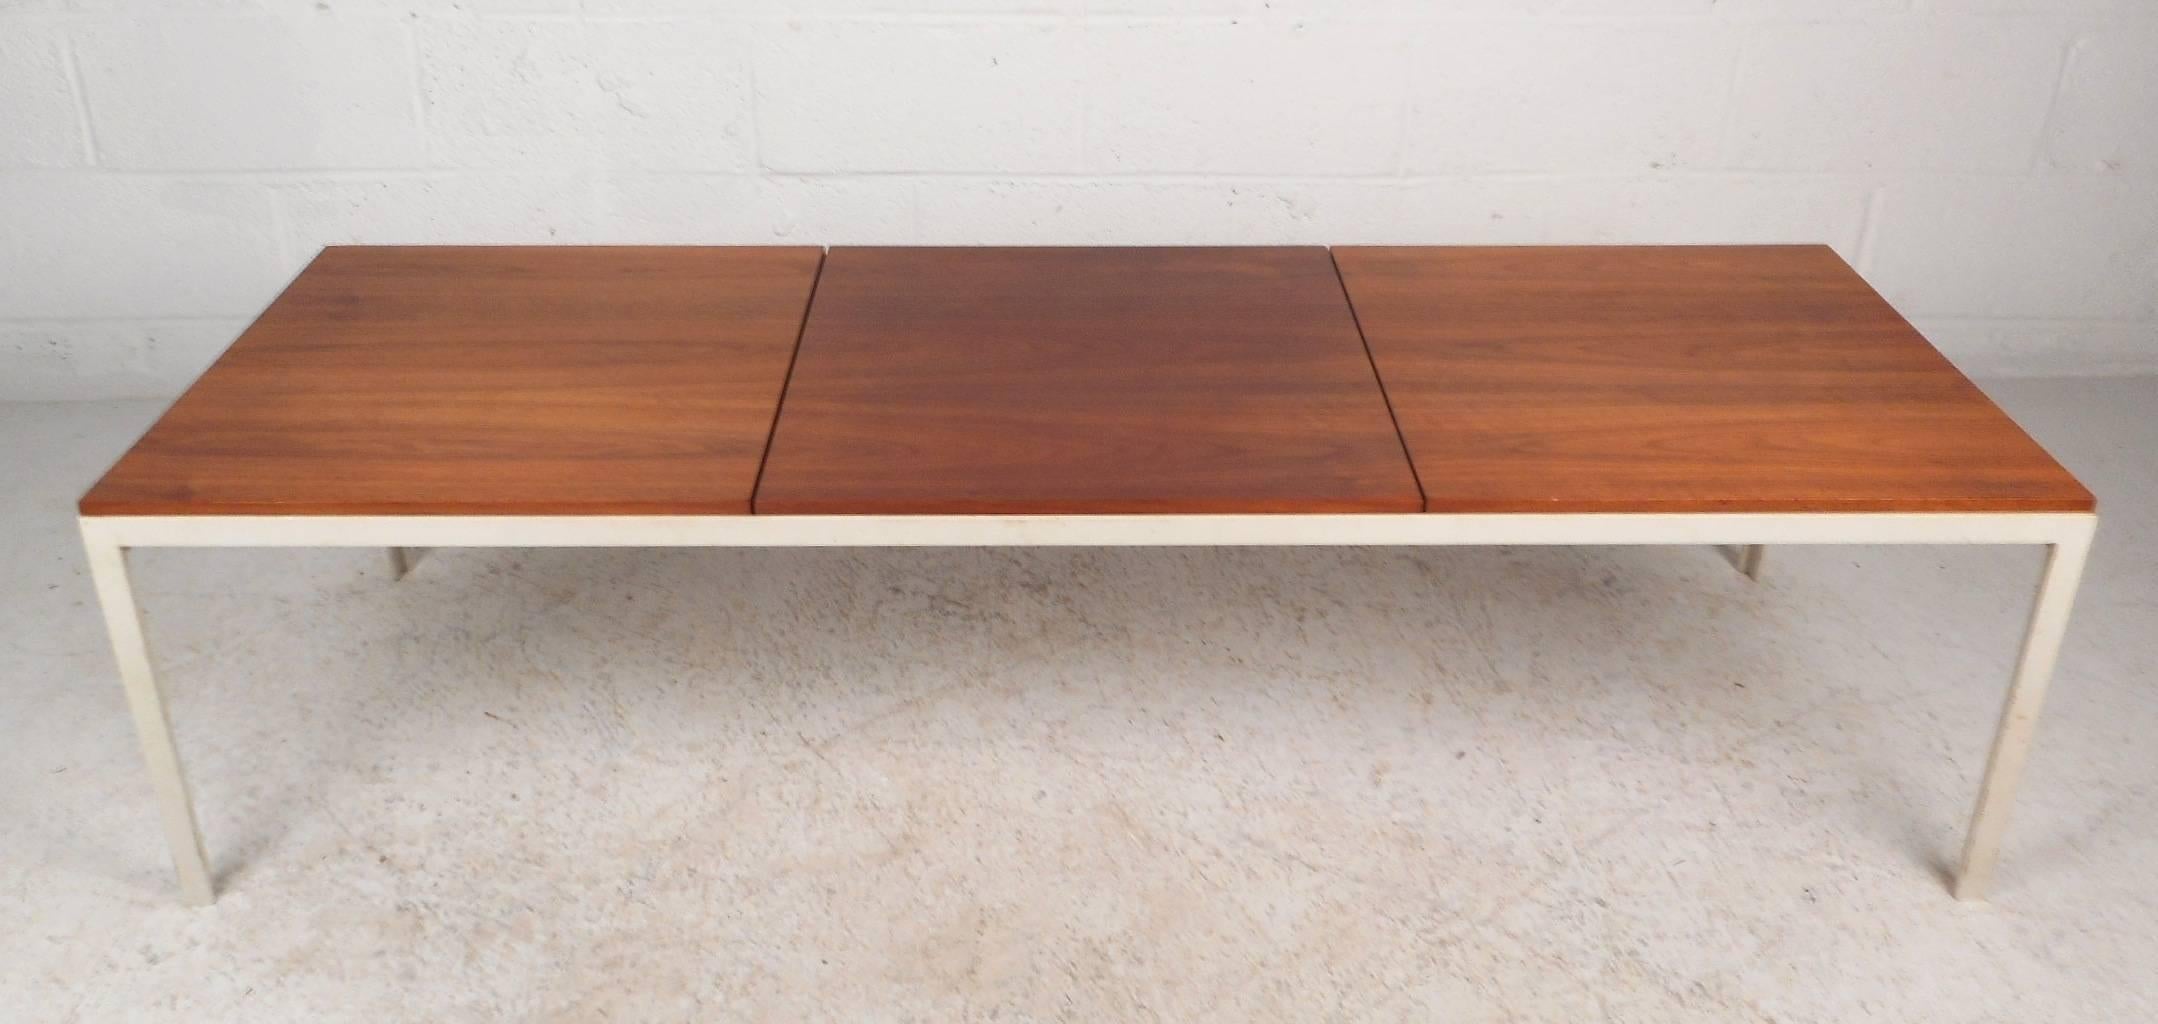 This gorgeous vintage modern coffee table features a heavy metal painted frame with a walnut wood top. Unique design displays three separate pieces on the tabletop. Rich walnut wood grain and a sleek straight design add to the Mid-Century appeal.